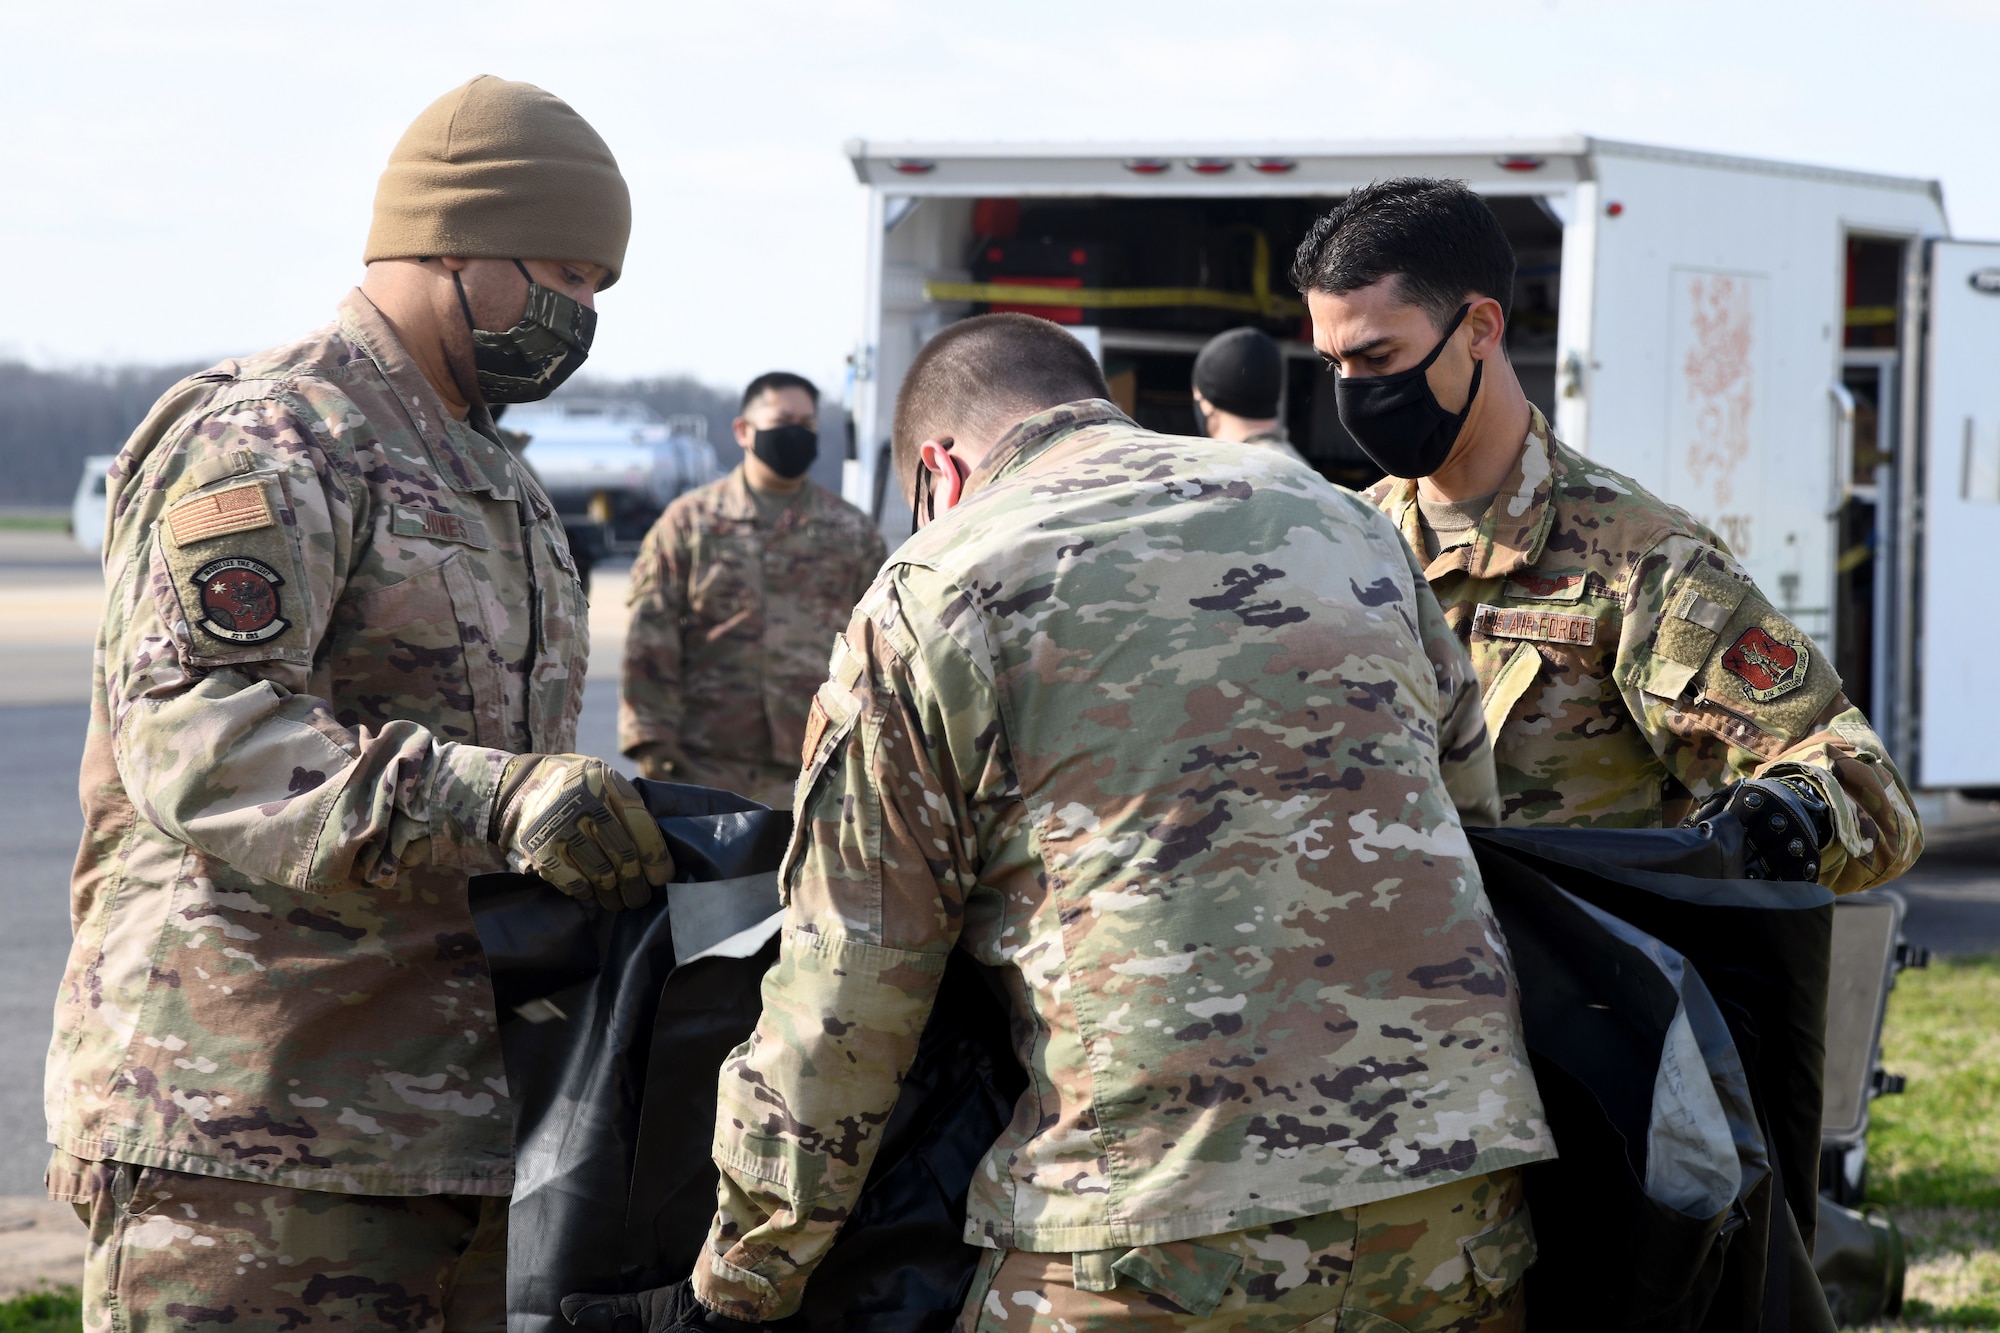 U.S. Airmen from the 621st Contingency Response Group and the 156th CRG prepare supplies during setup of the tactical operations center Jan. 31, 2021, at the Alexandria International Airport, Louisiana. The Airmen integrated with their total force partners from the Puerto Rico Air National Guard’s 156th CRG as well as the 452nd Contingency Response Squadron from March Air Reserve Base, California, during a Joint Readiness Training Center exercise Jan. 31-Feb. 9 in Louisiana. (U.S. Air Force photo by Master Sgt. Melissa B. White)